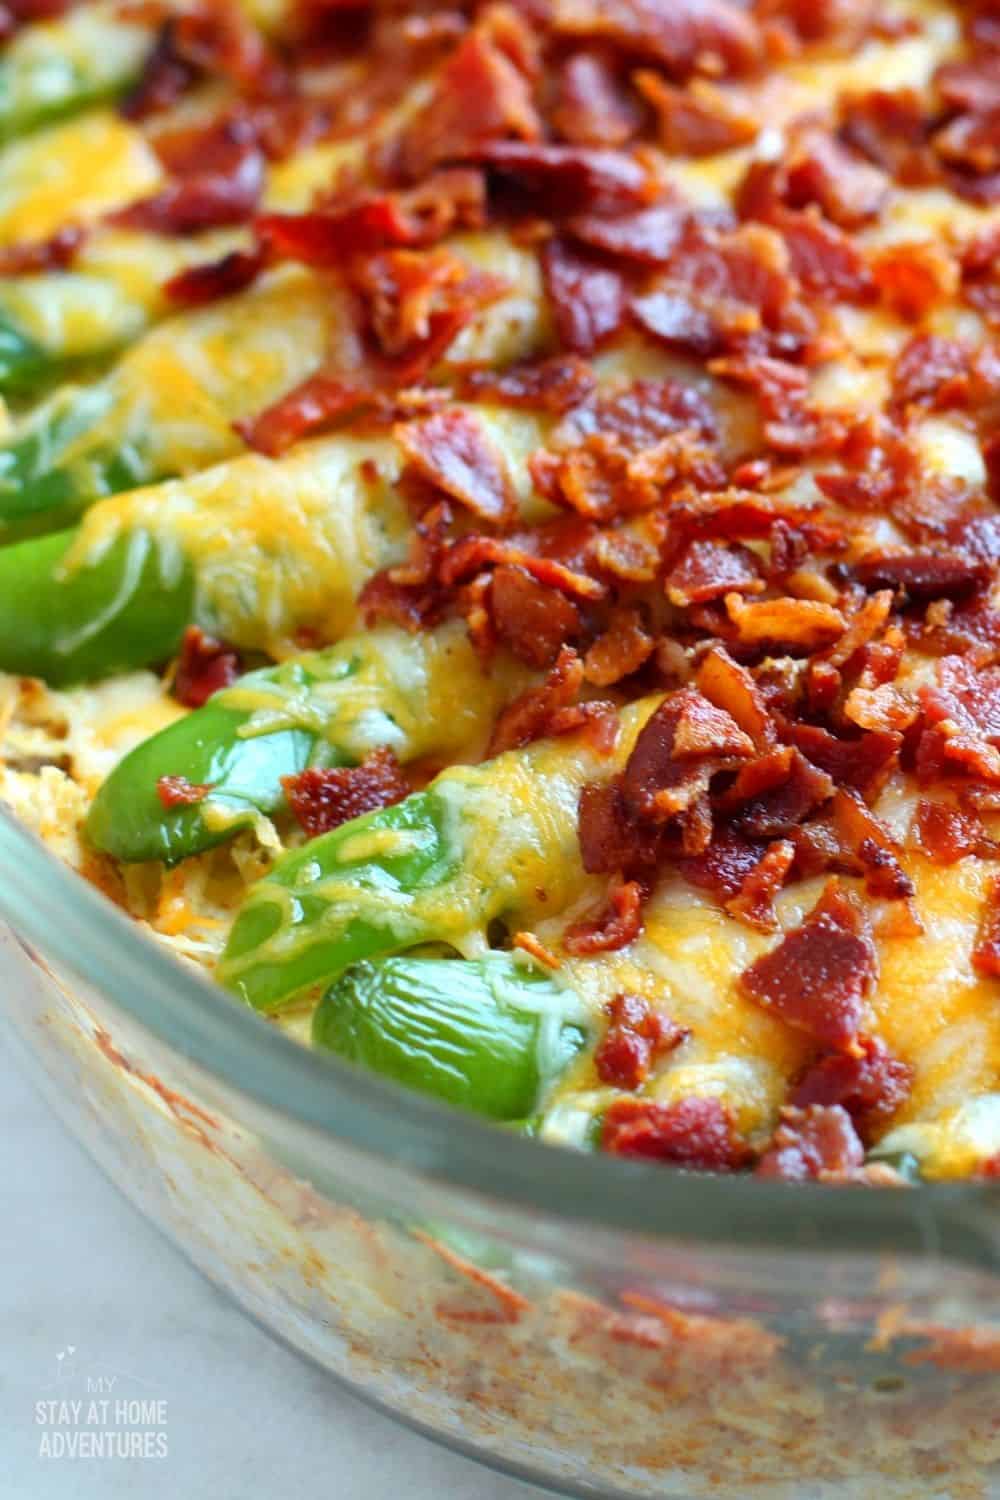 This Keto Jalapeno Popper Chicken Casserole is so creamy and packed with flavorful ingredients yet it contains very low in carbohydrates. via @mystayathome